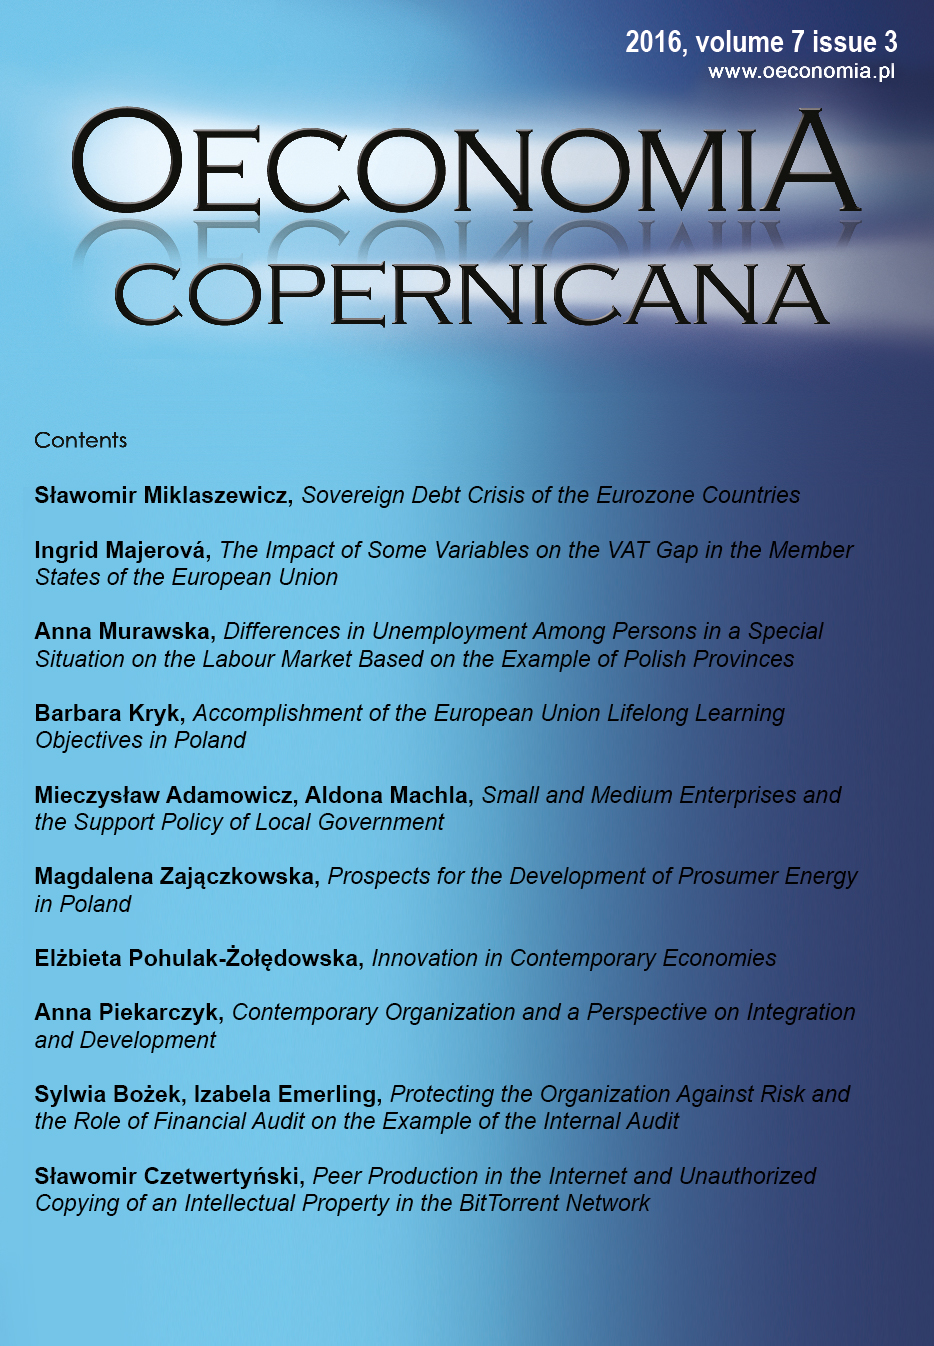 CONTEMPORARY ORGANIZATION AND A PERSPECTIVE ON INTEGRATION AND DEVELOPMENT Cover Image